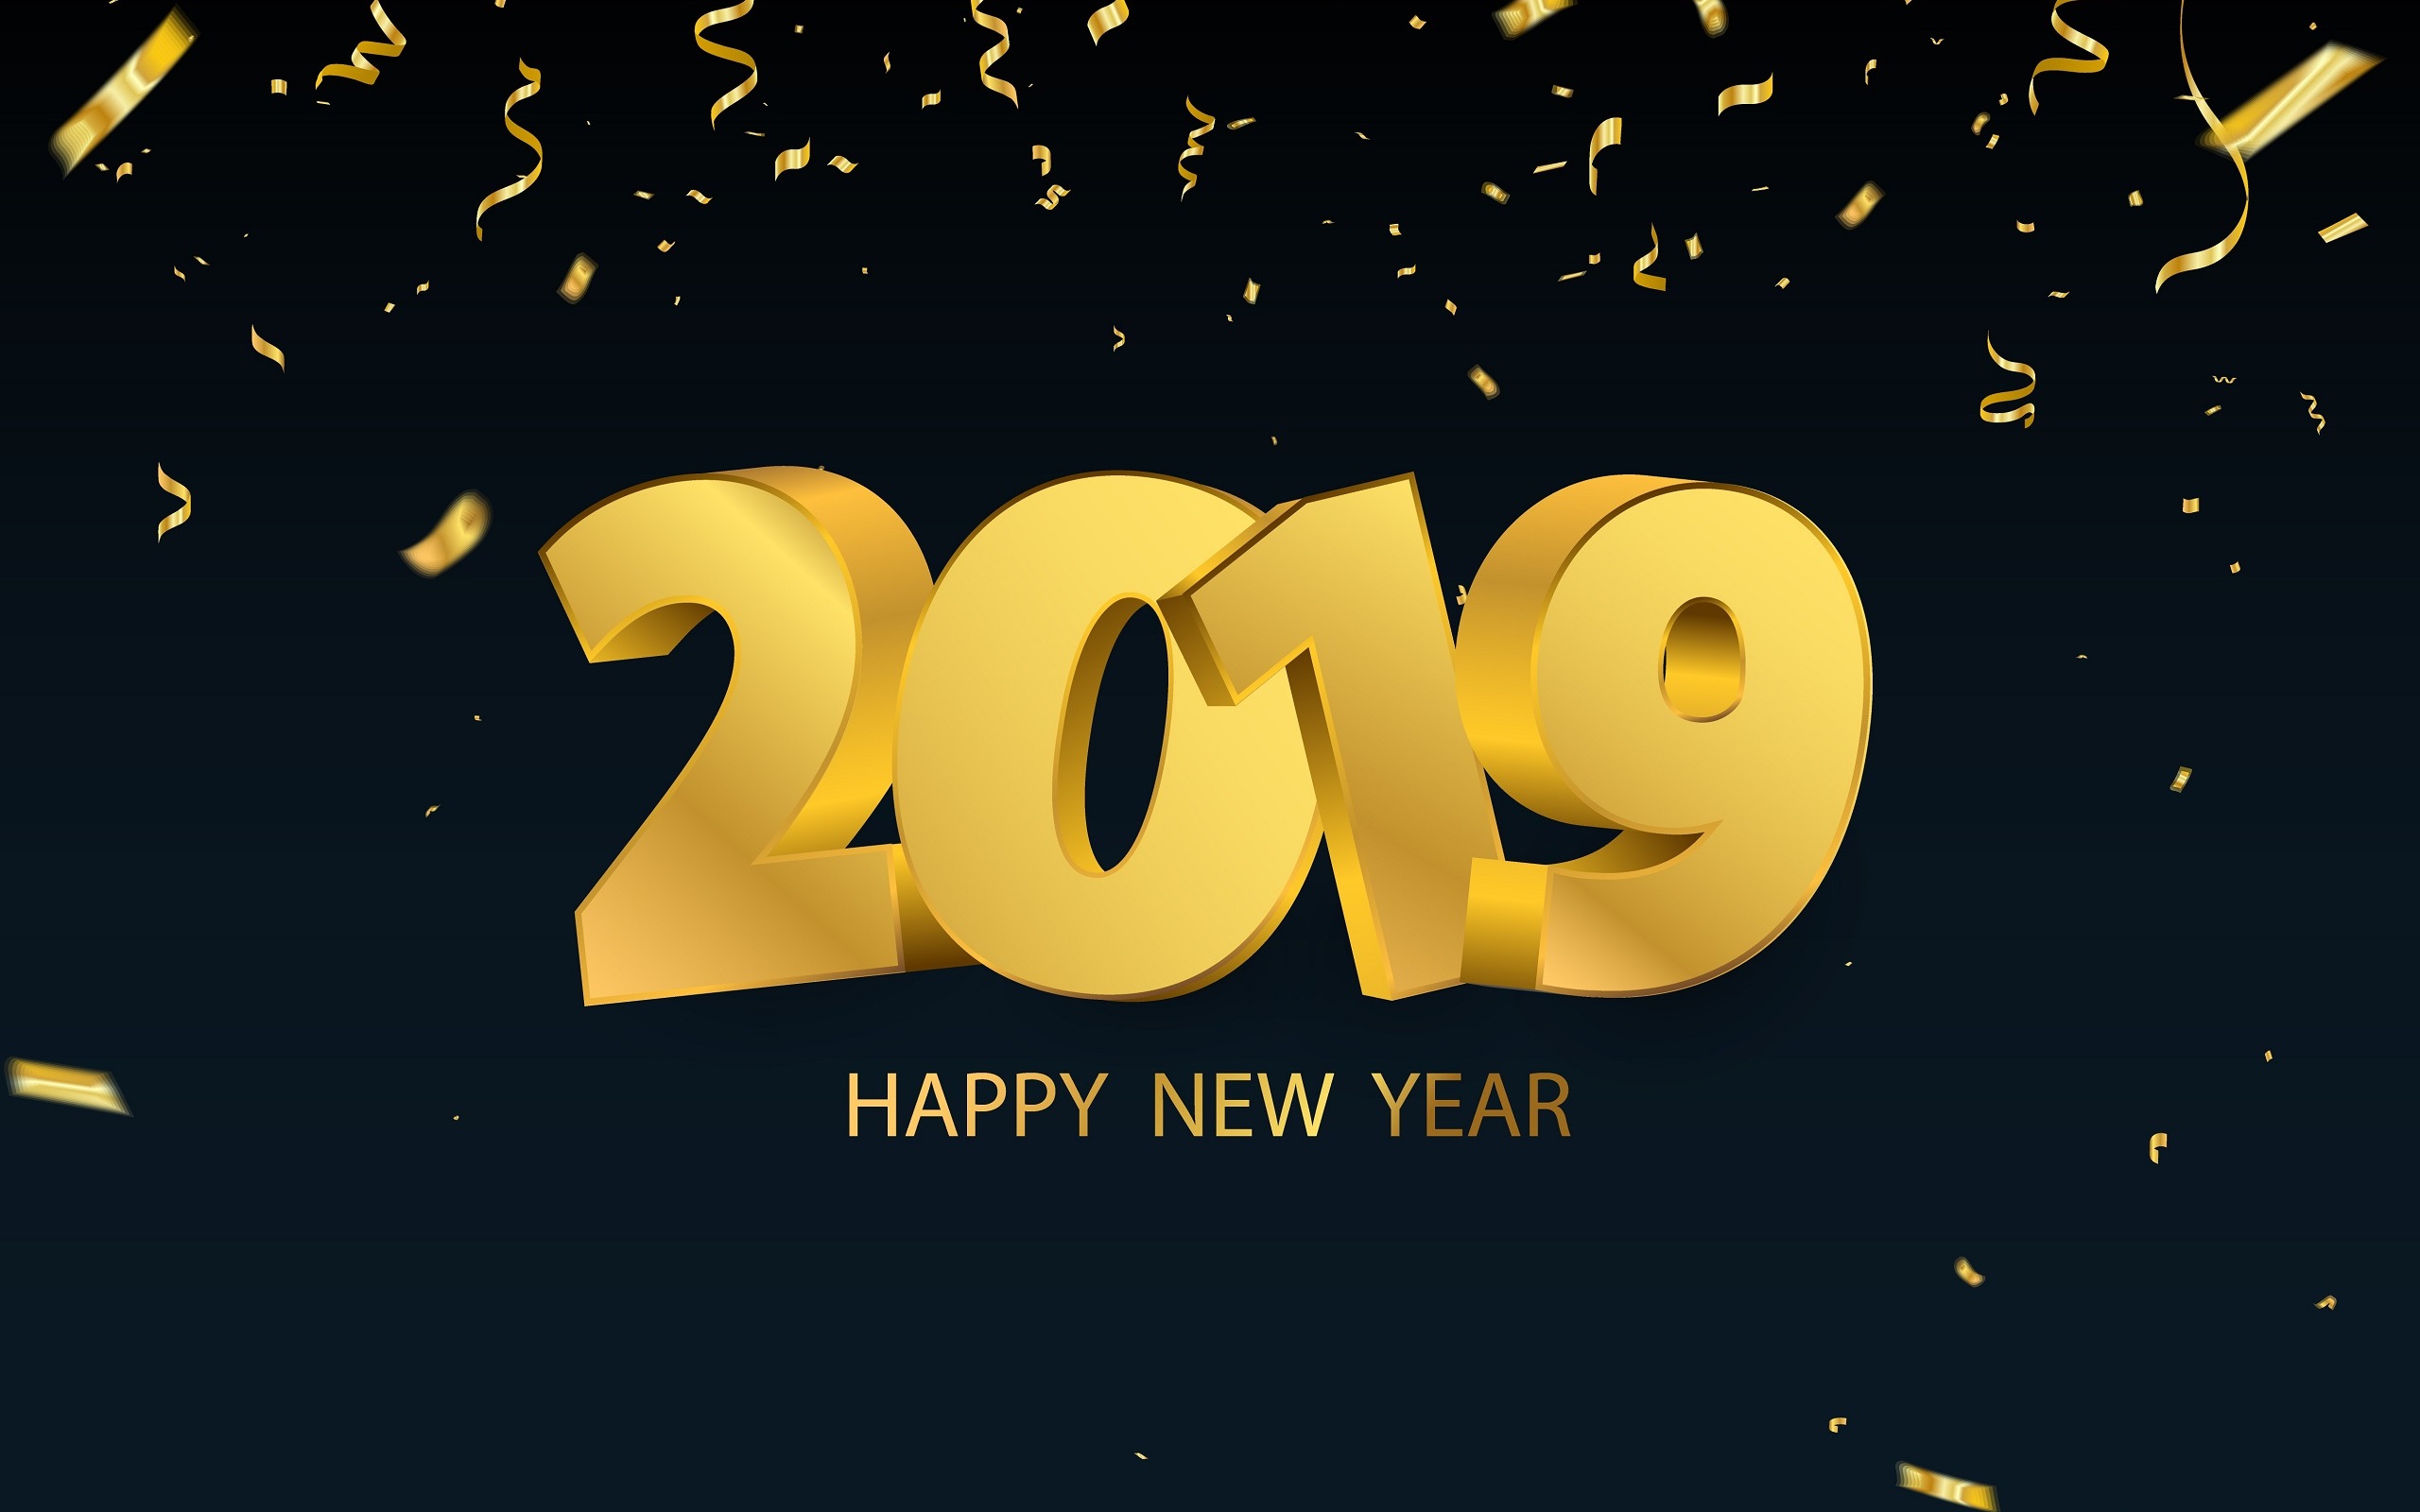 Happy New Year 2019 HD wallpapers #13 - 2560x1600